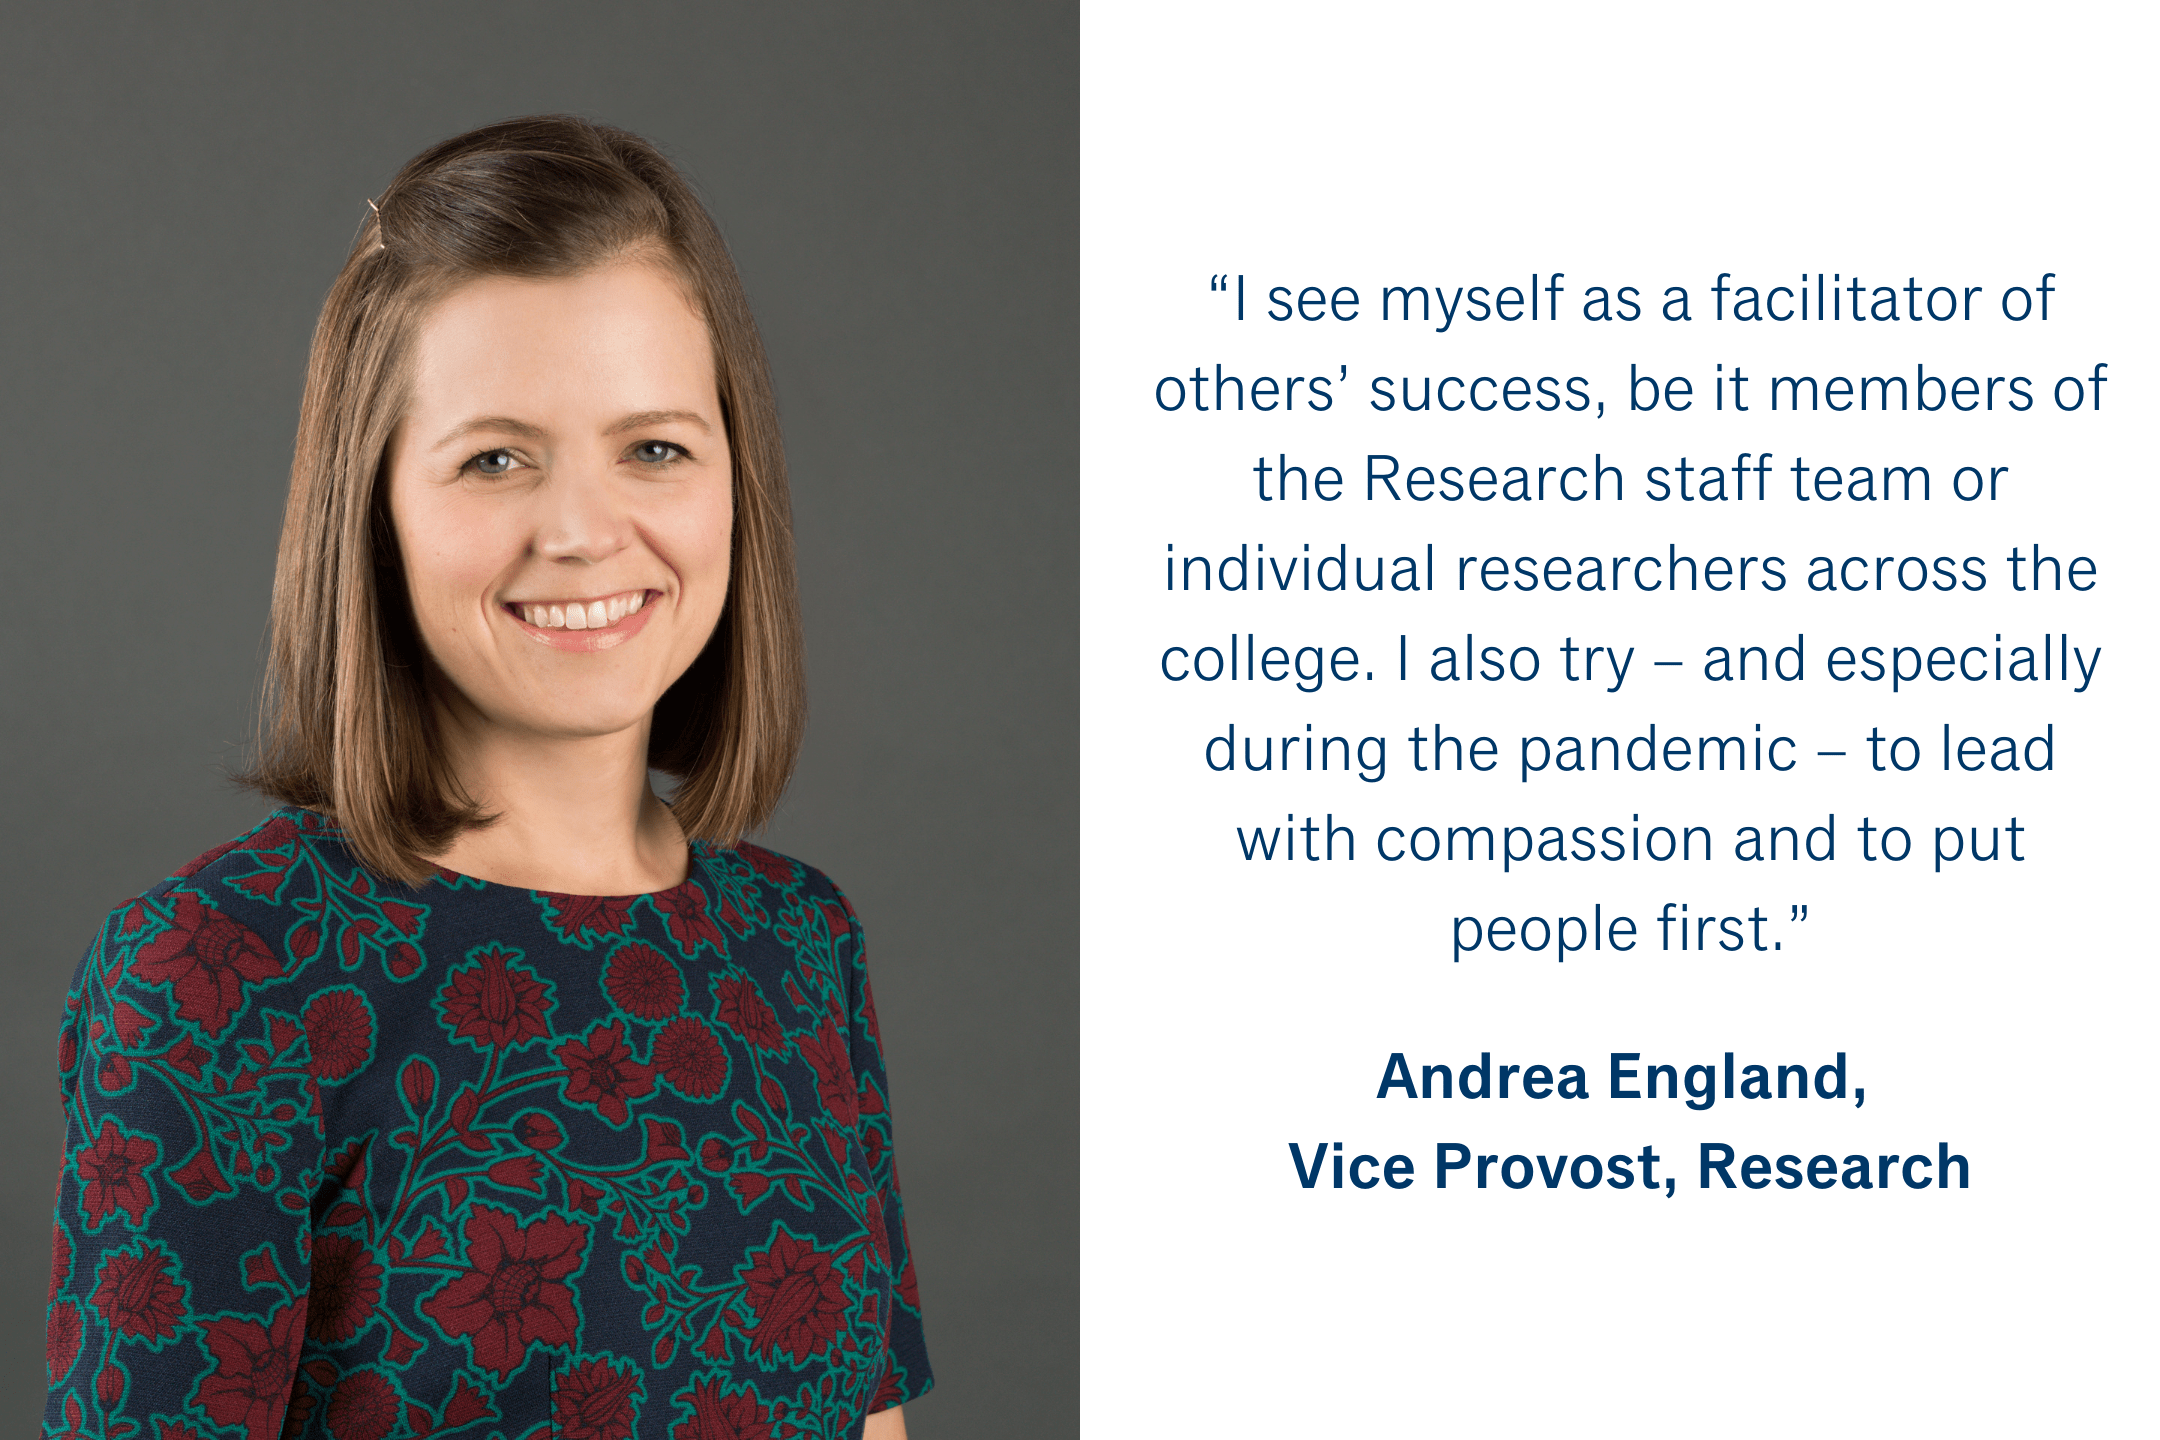 “I see myself as a facilitator of others’ success, be it members of the Research staff team or individual researchers across the college.  I also try – and especially during the pandemic – to lead with compassion and to put people first.” Andrea England, Vice Provost, Research